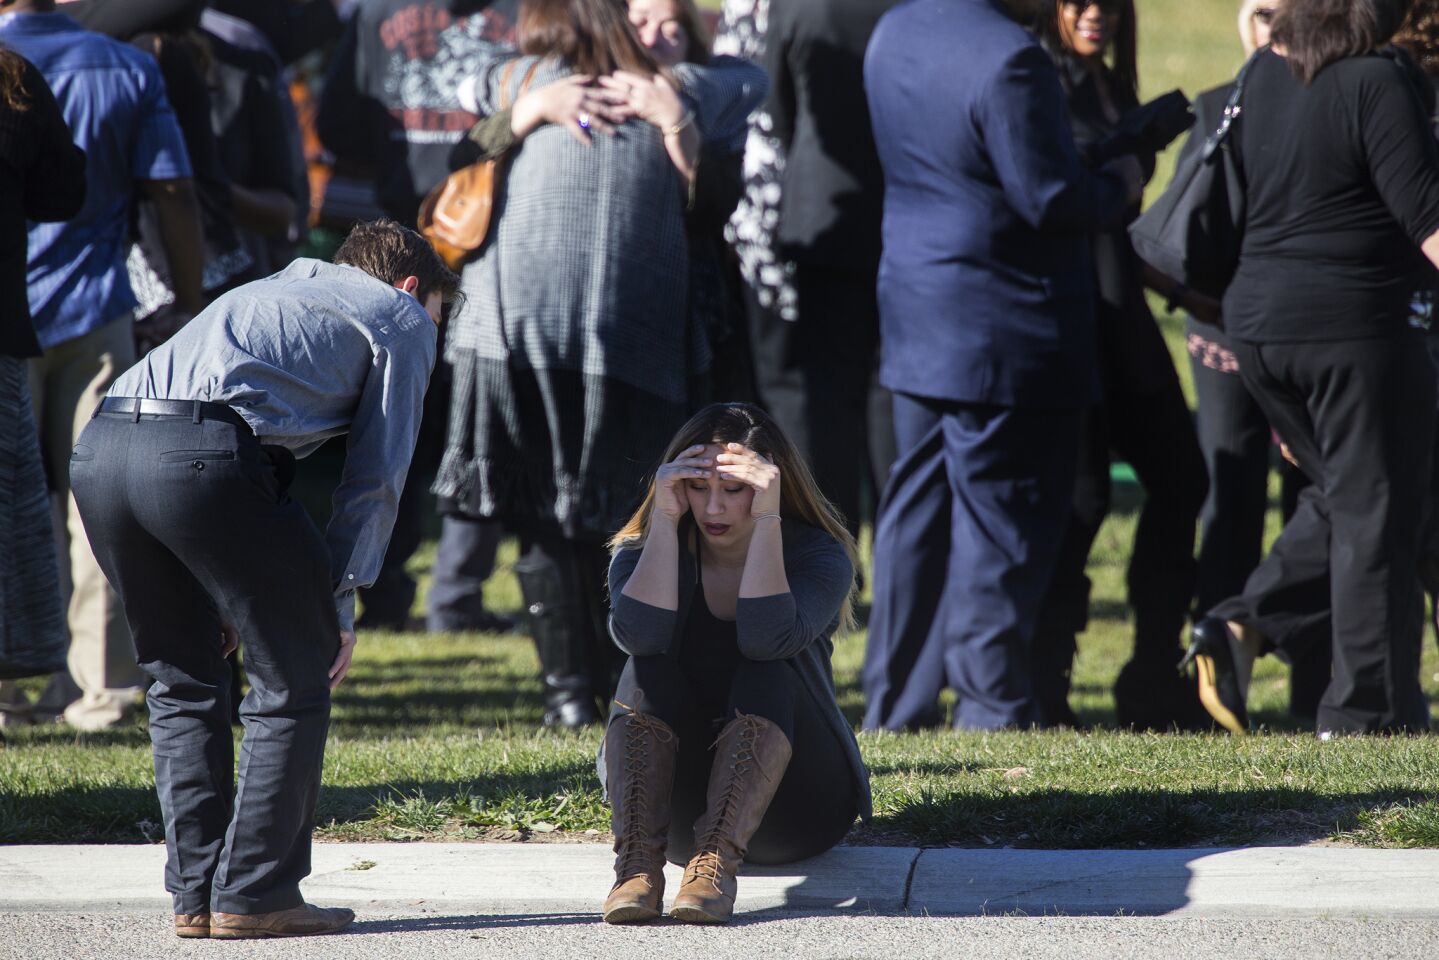 A mourner sits on the curb with her head in her hands during the graveside ceremony for San Bernardino shooting victim Robert Adams at Montecito Memorial Park in Colton.